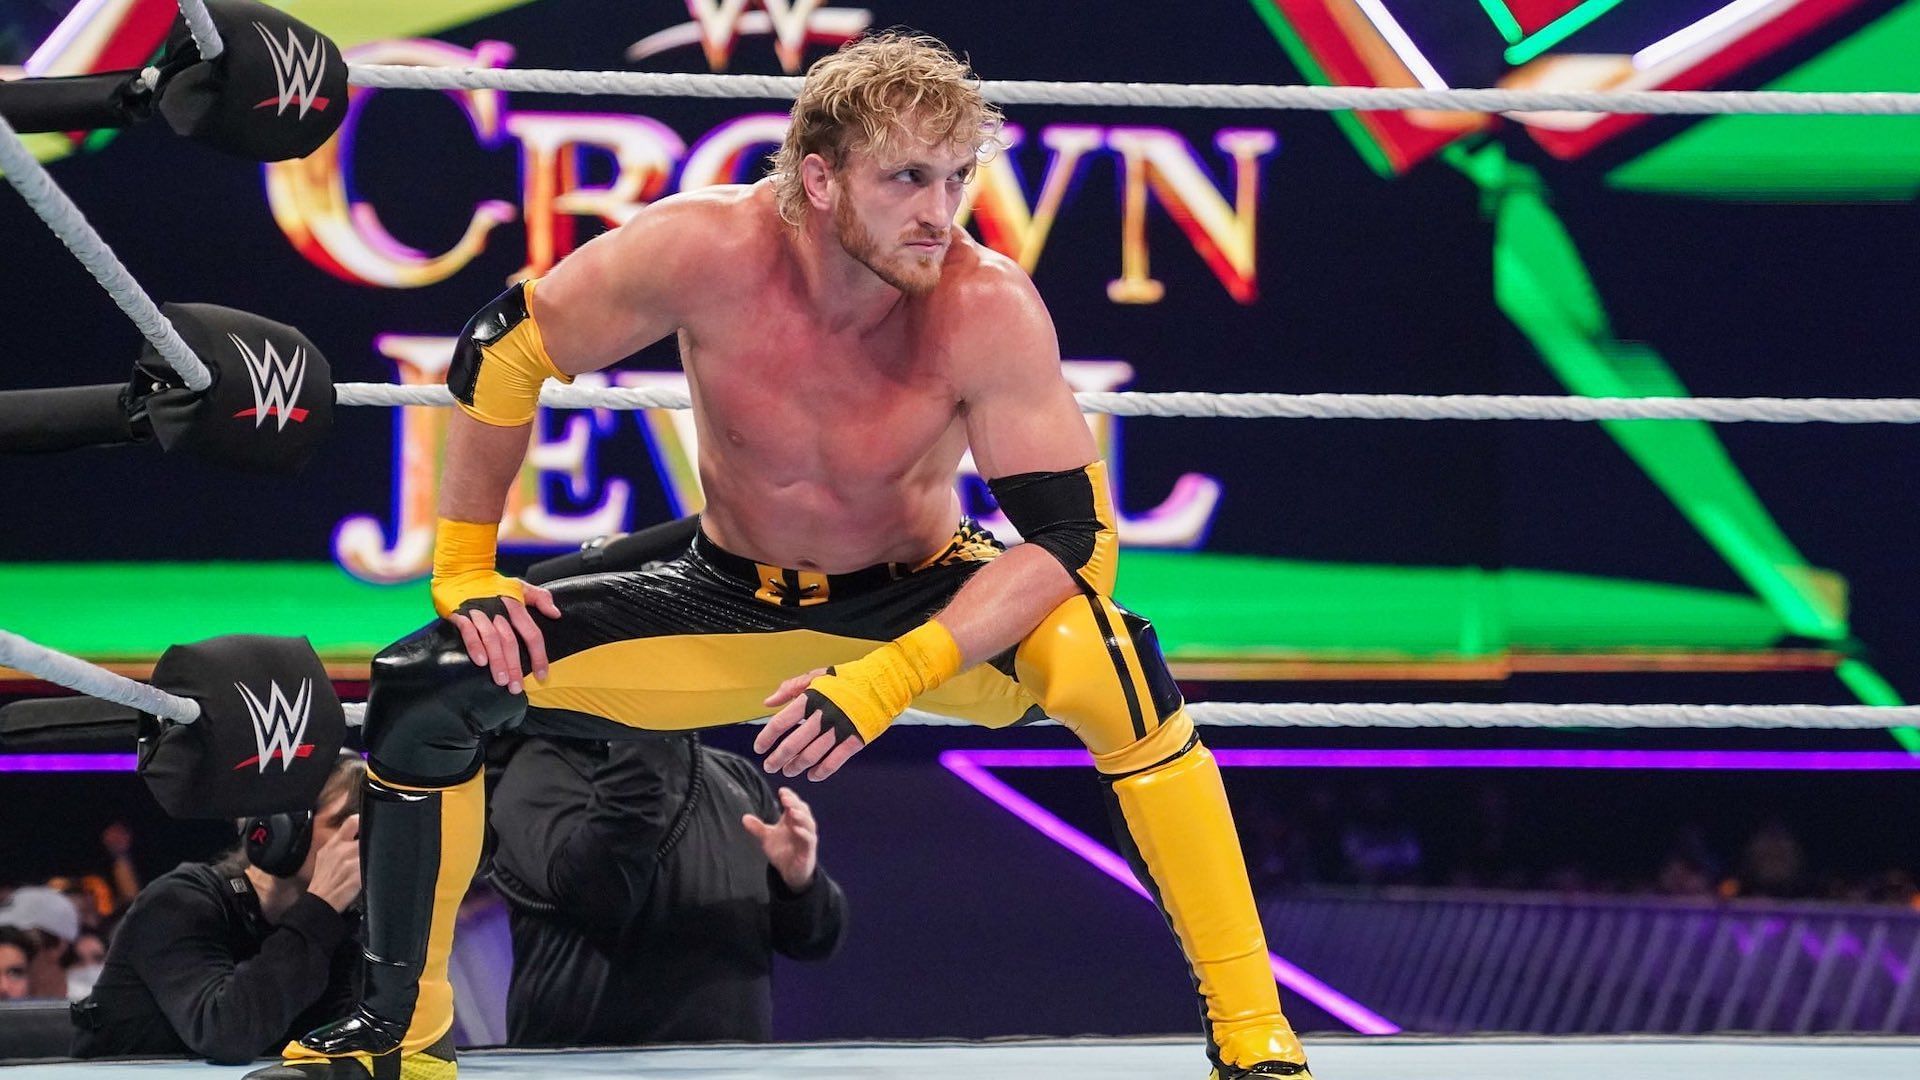 Logan Paul suffered torn ACL and MCL during his match at Crown Jewel